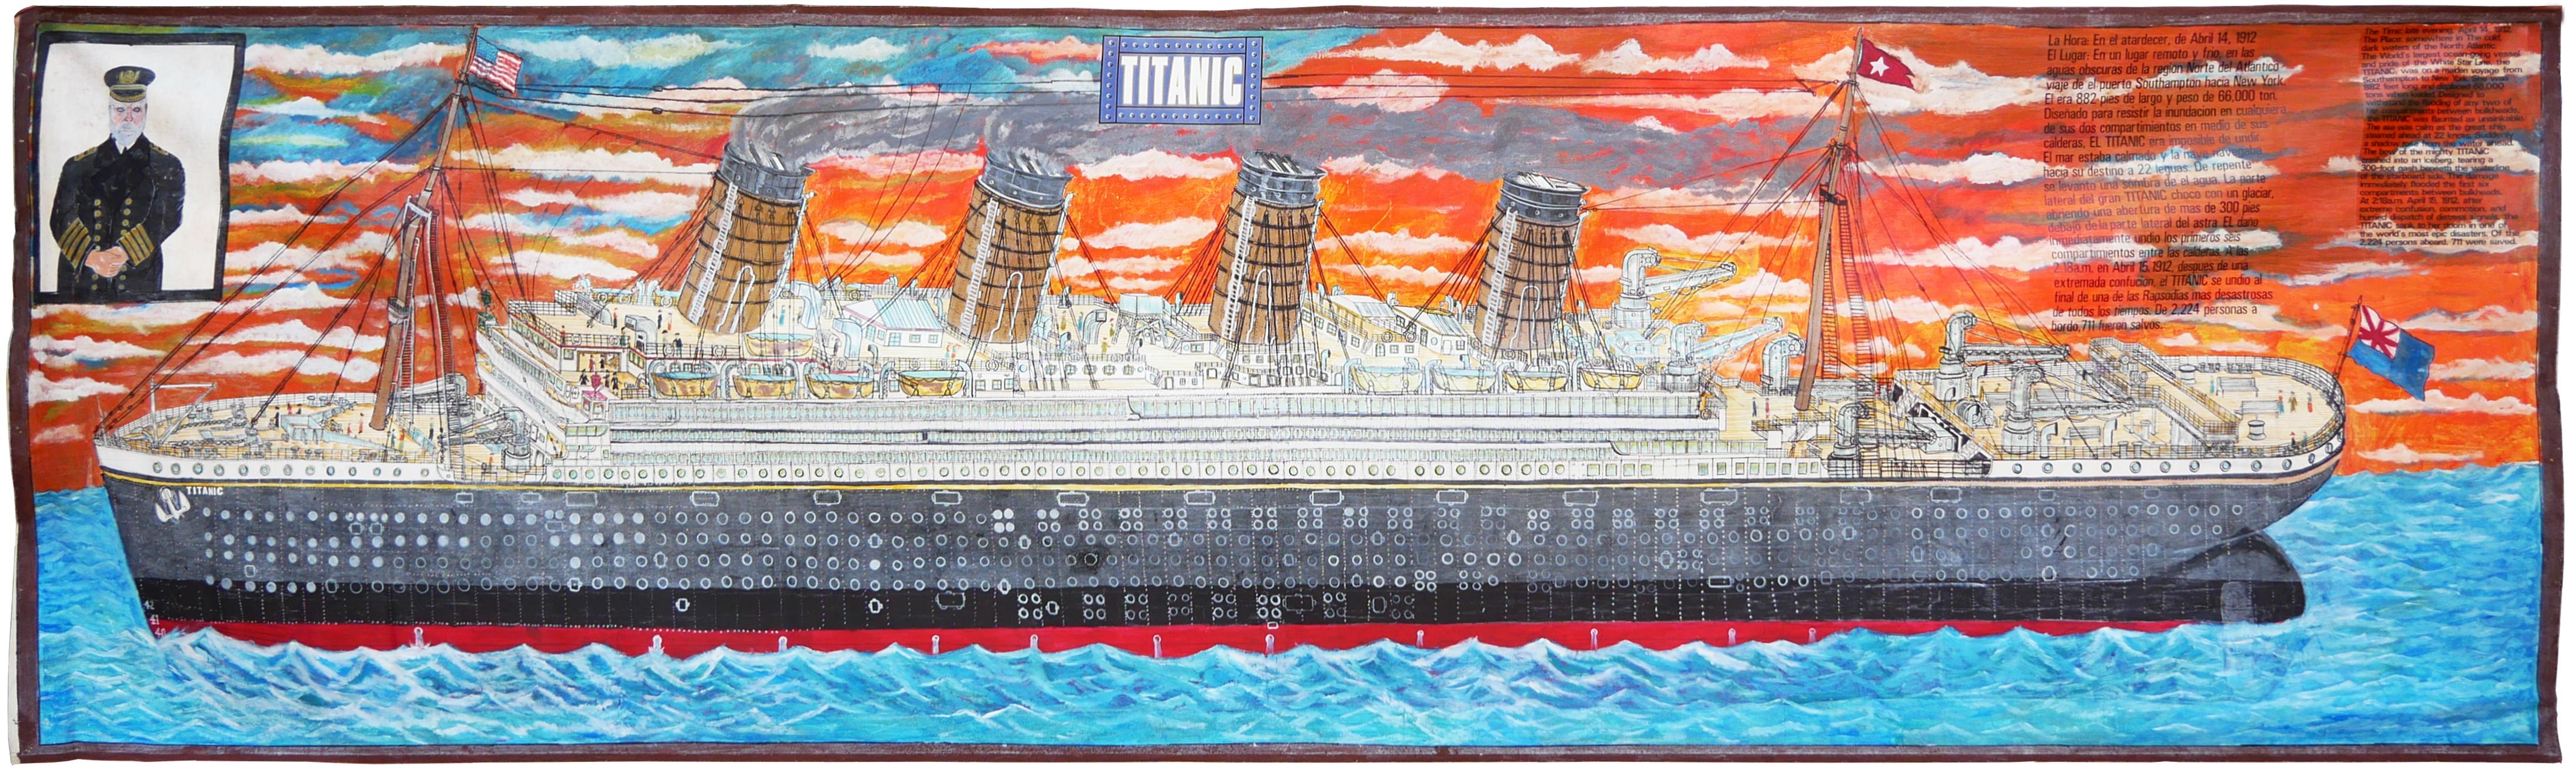 Unknown Abstract Drawing - Orange & Blue-Toned Abstract Contemporary Painting of the Titanic